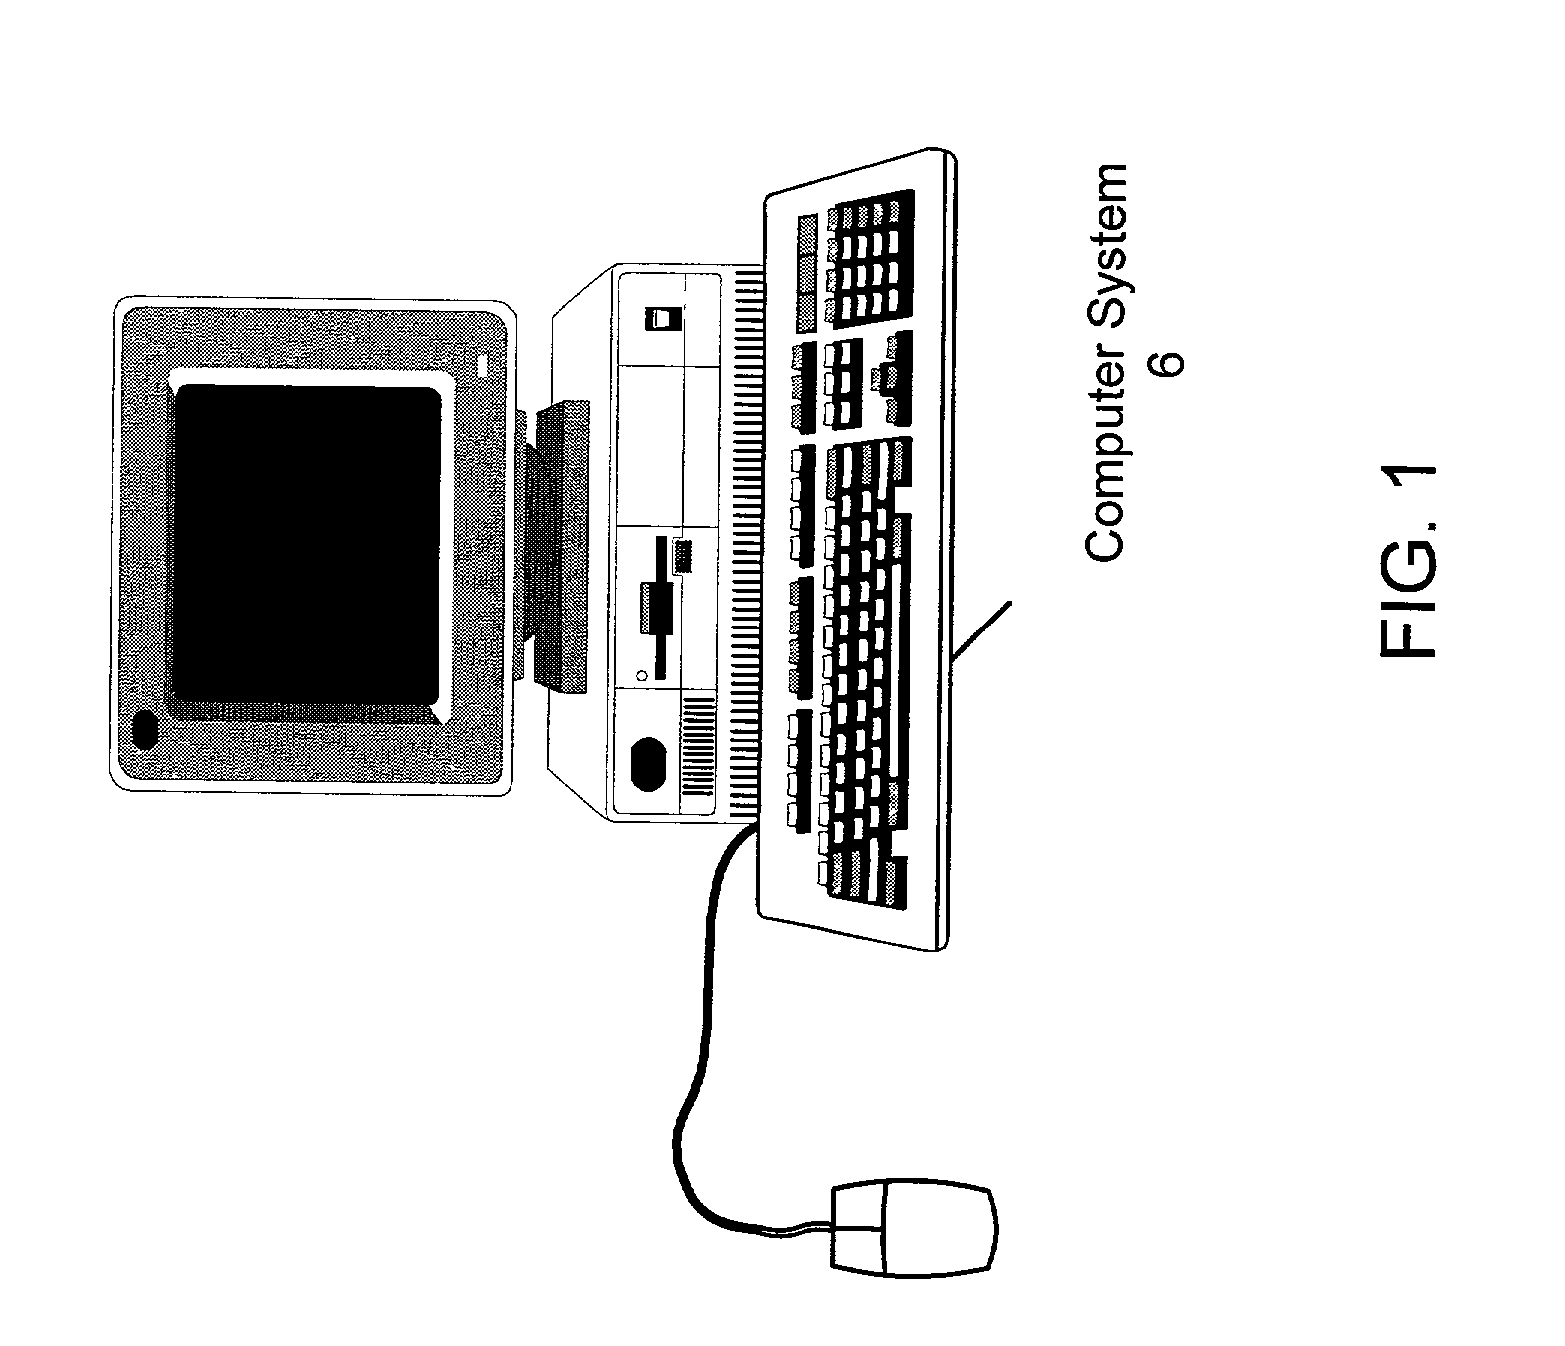 System and method for pre-processing input data to a non-linear model for use in electronic commerce